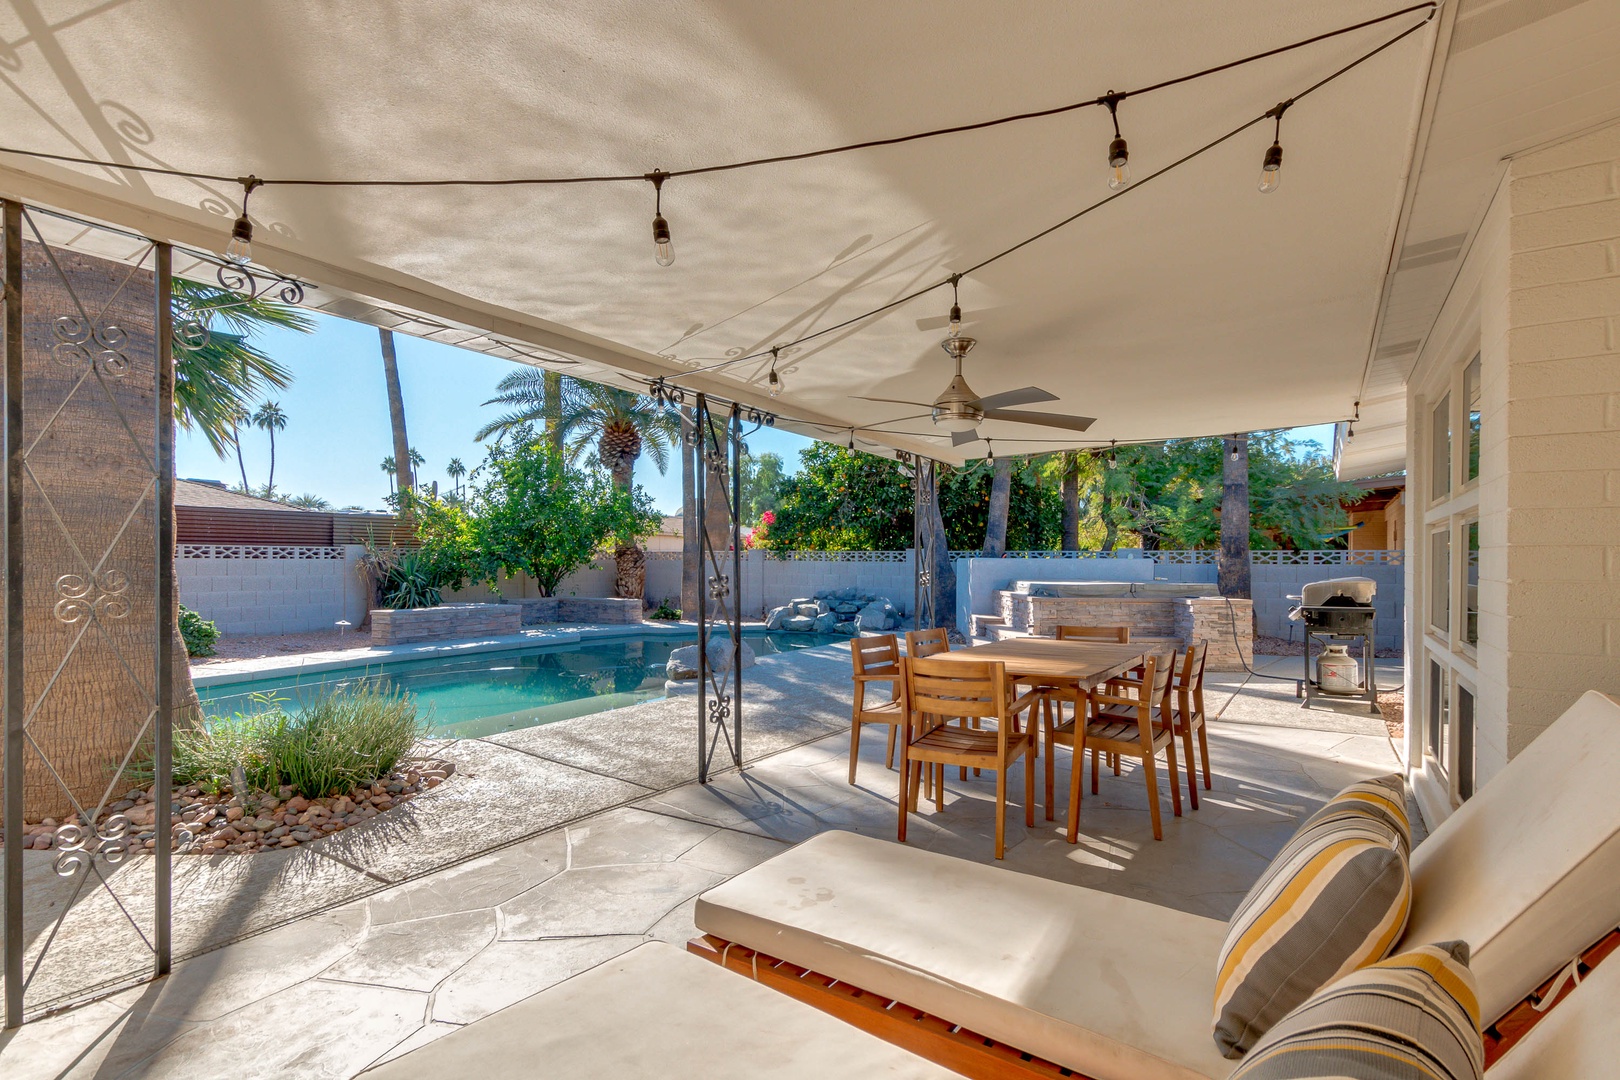 Spacious covered patio with loungers and table. Pool and hot tub in the back.